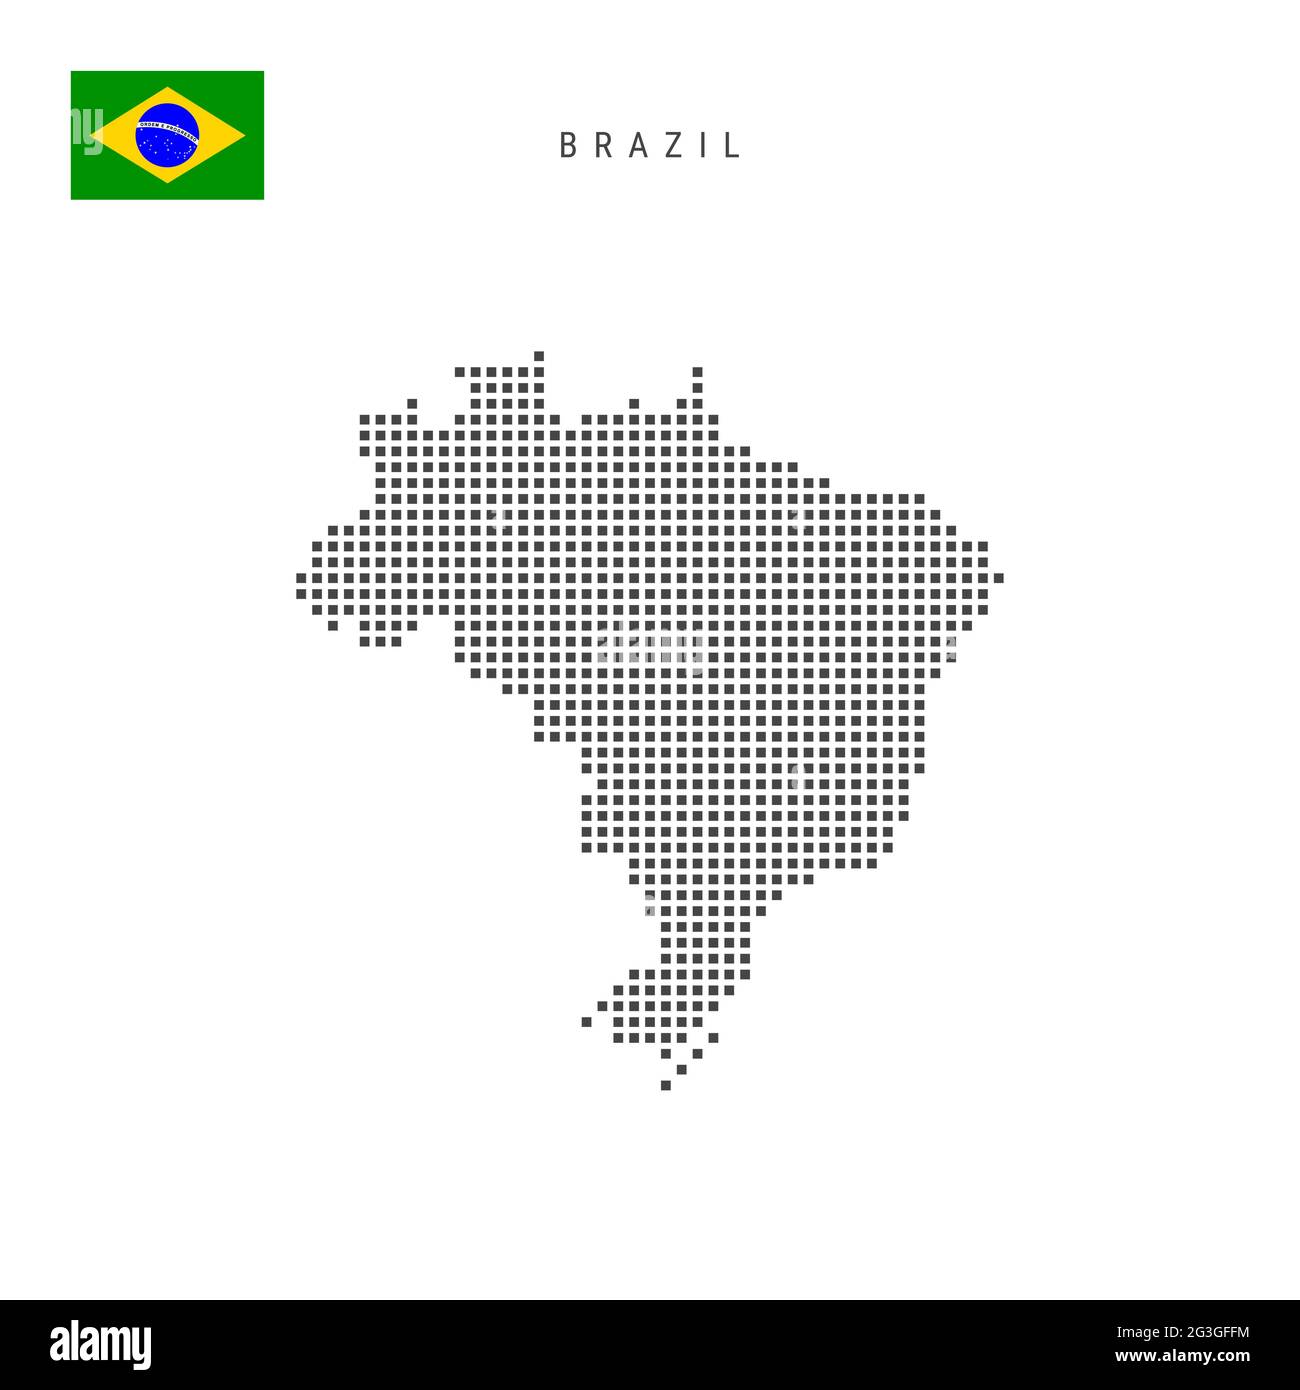 Map of Brazil Silhouette, Brazil Map Dotted, Flag of Brazil Stock  Illustration - Illustration of emblem, concept: 206241758